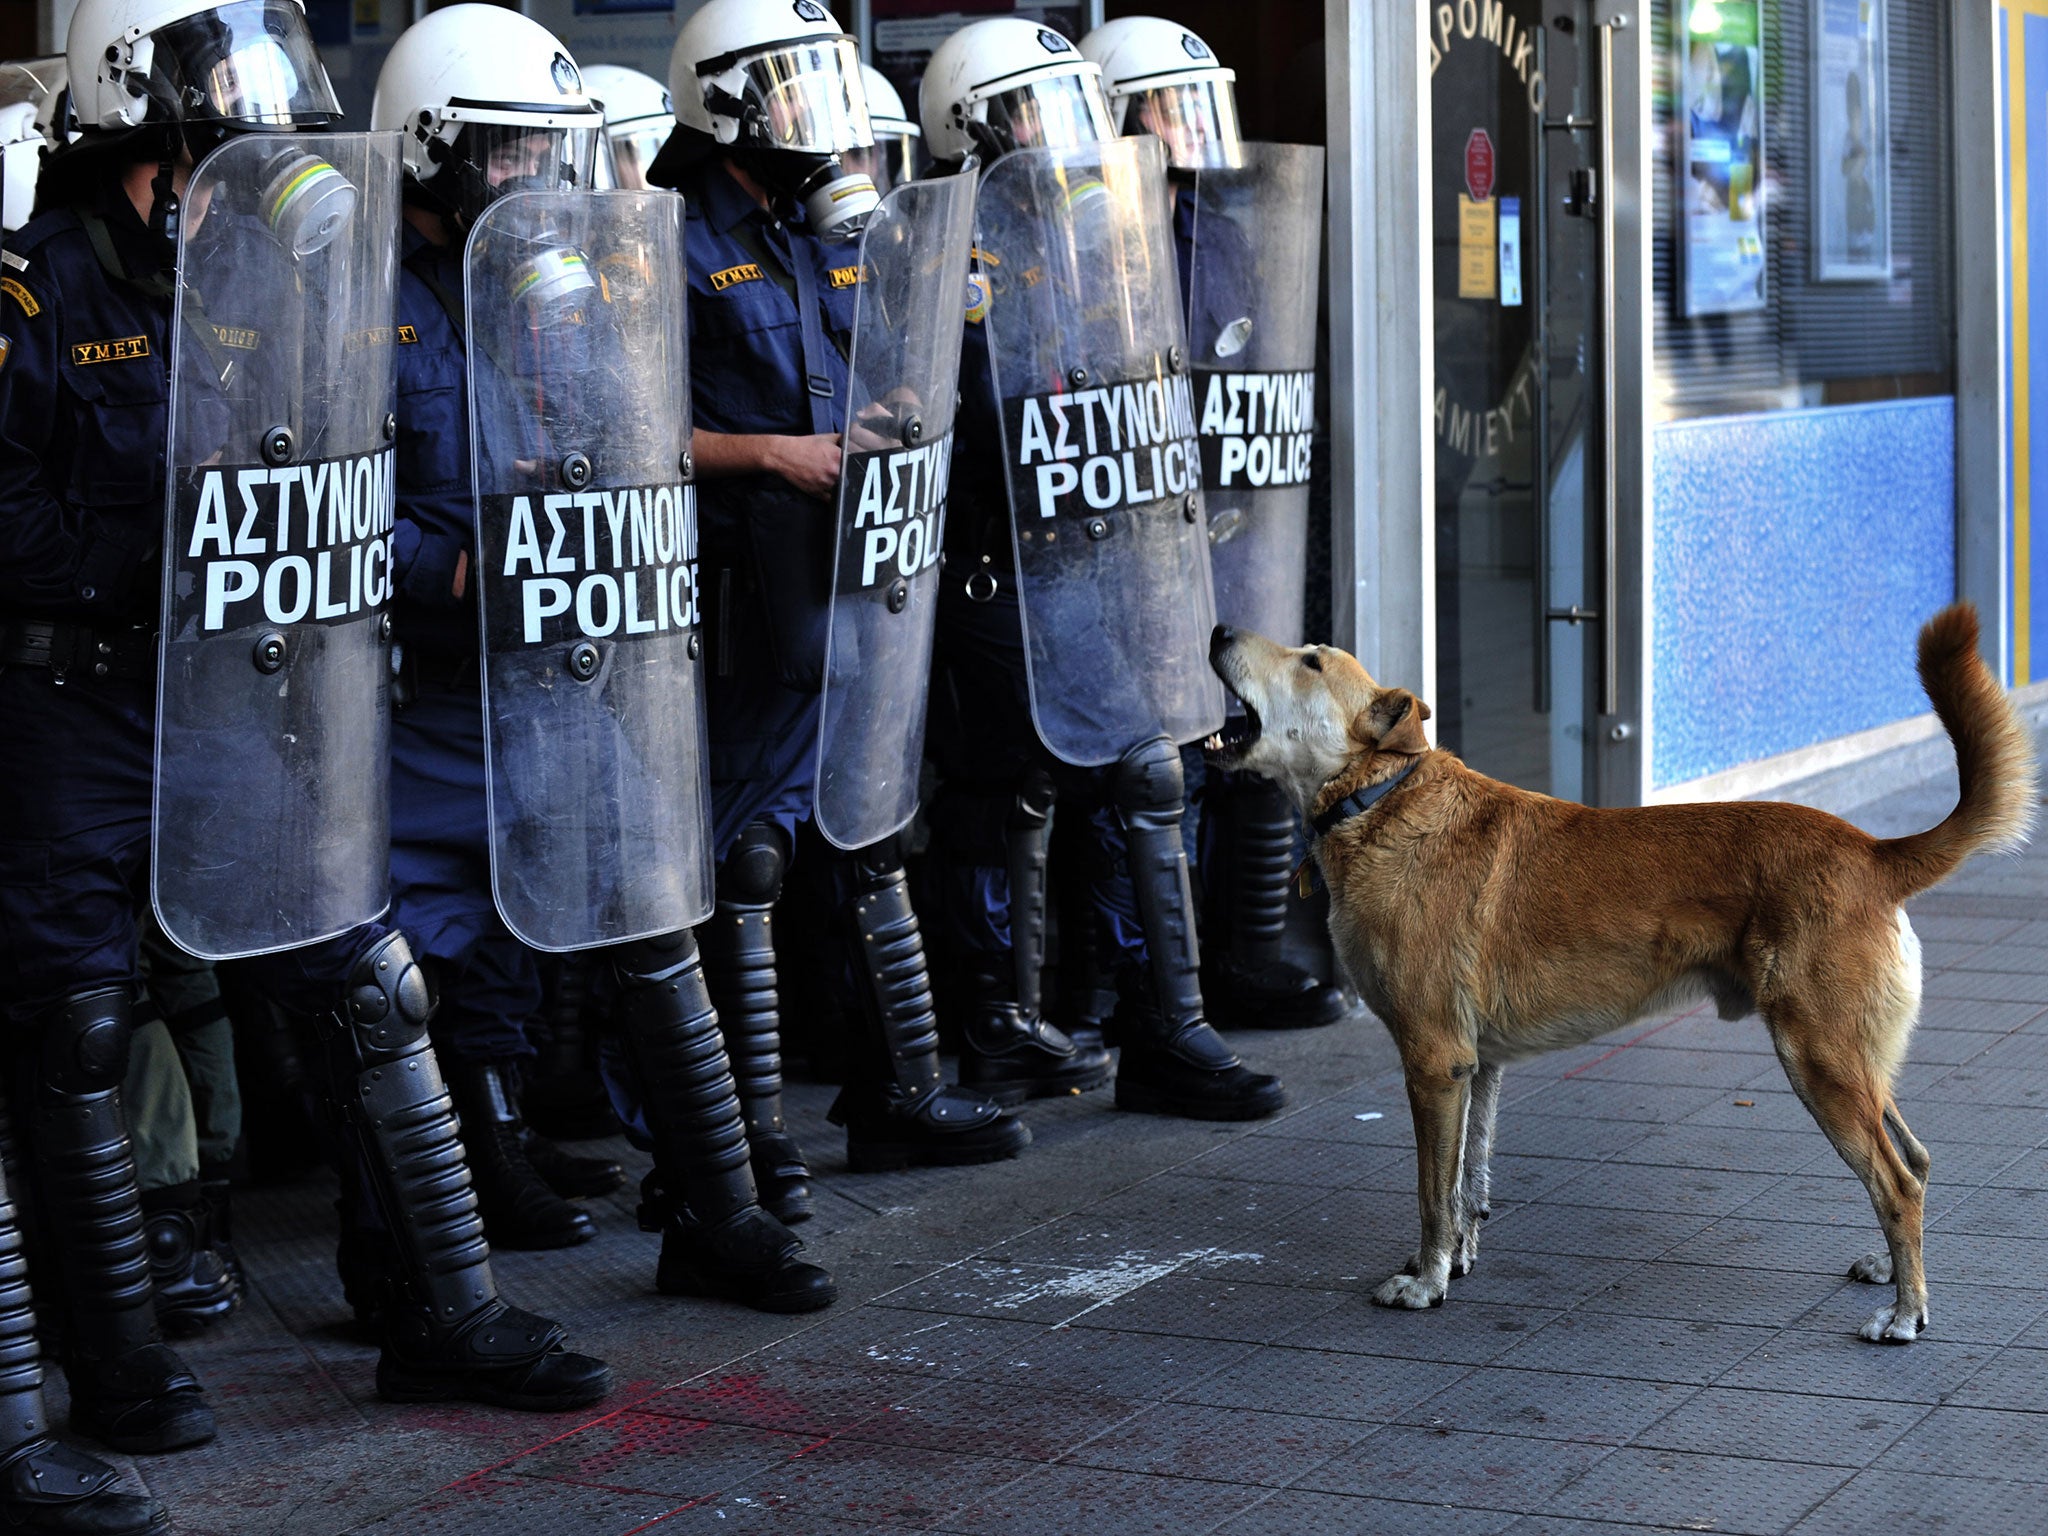 Loukanikos, the much-loved Greek riot dog who became internationally famous for appearing on the front line of anti-austerity protests in the country, has died